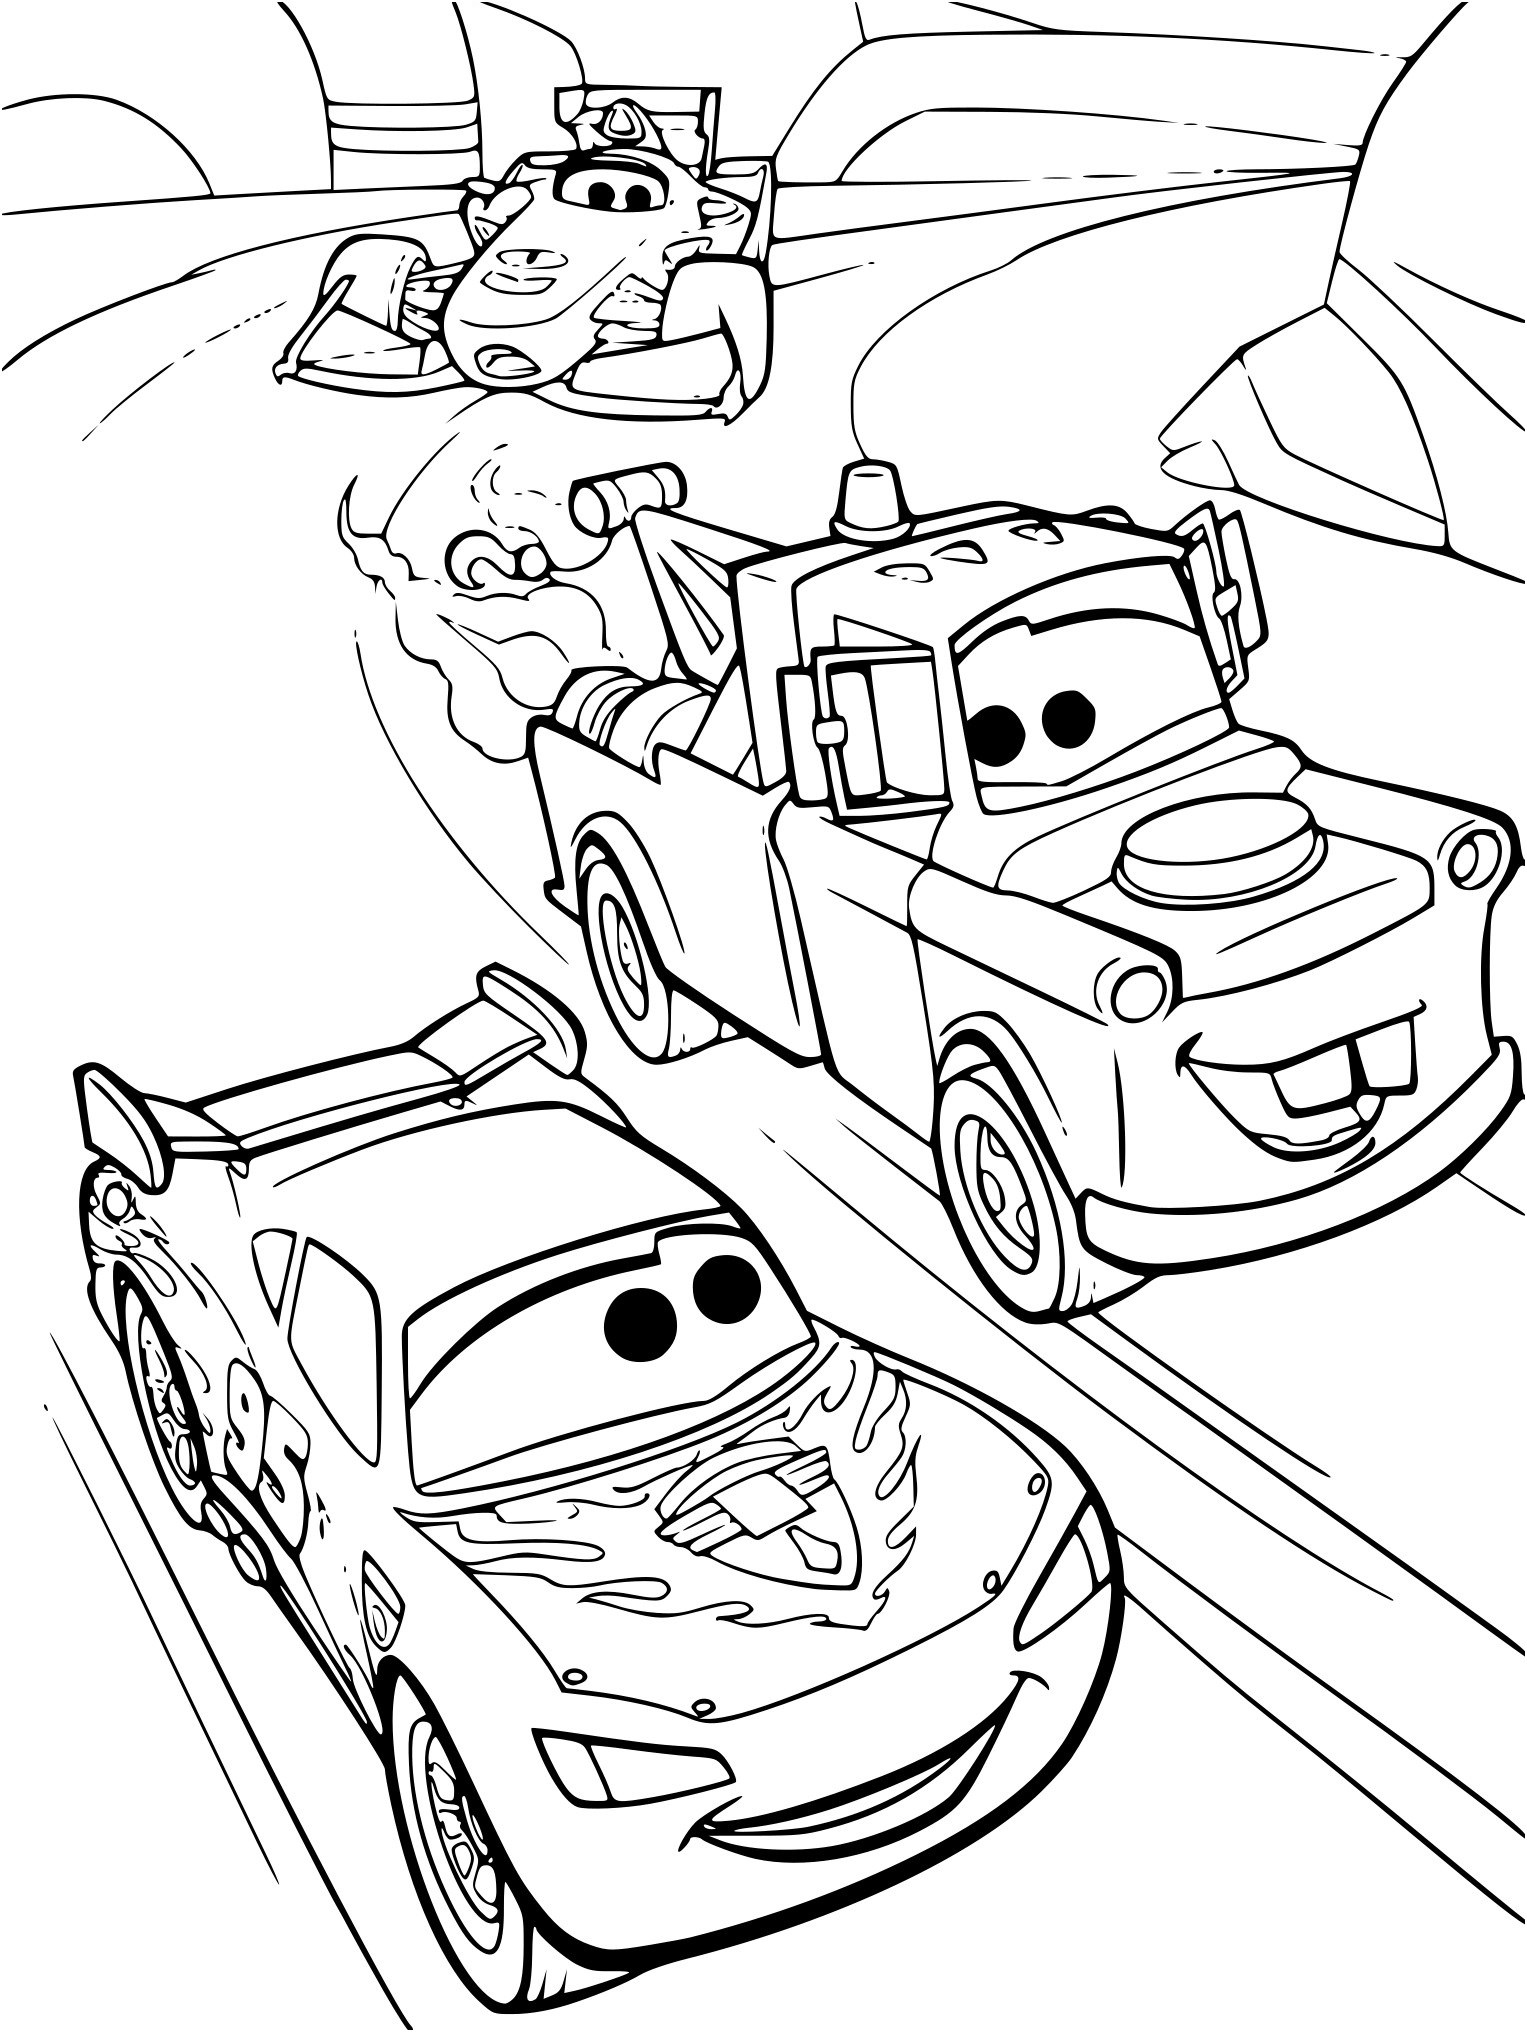 luxe coloriage cars toon imprimer